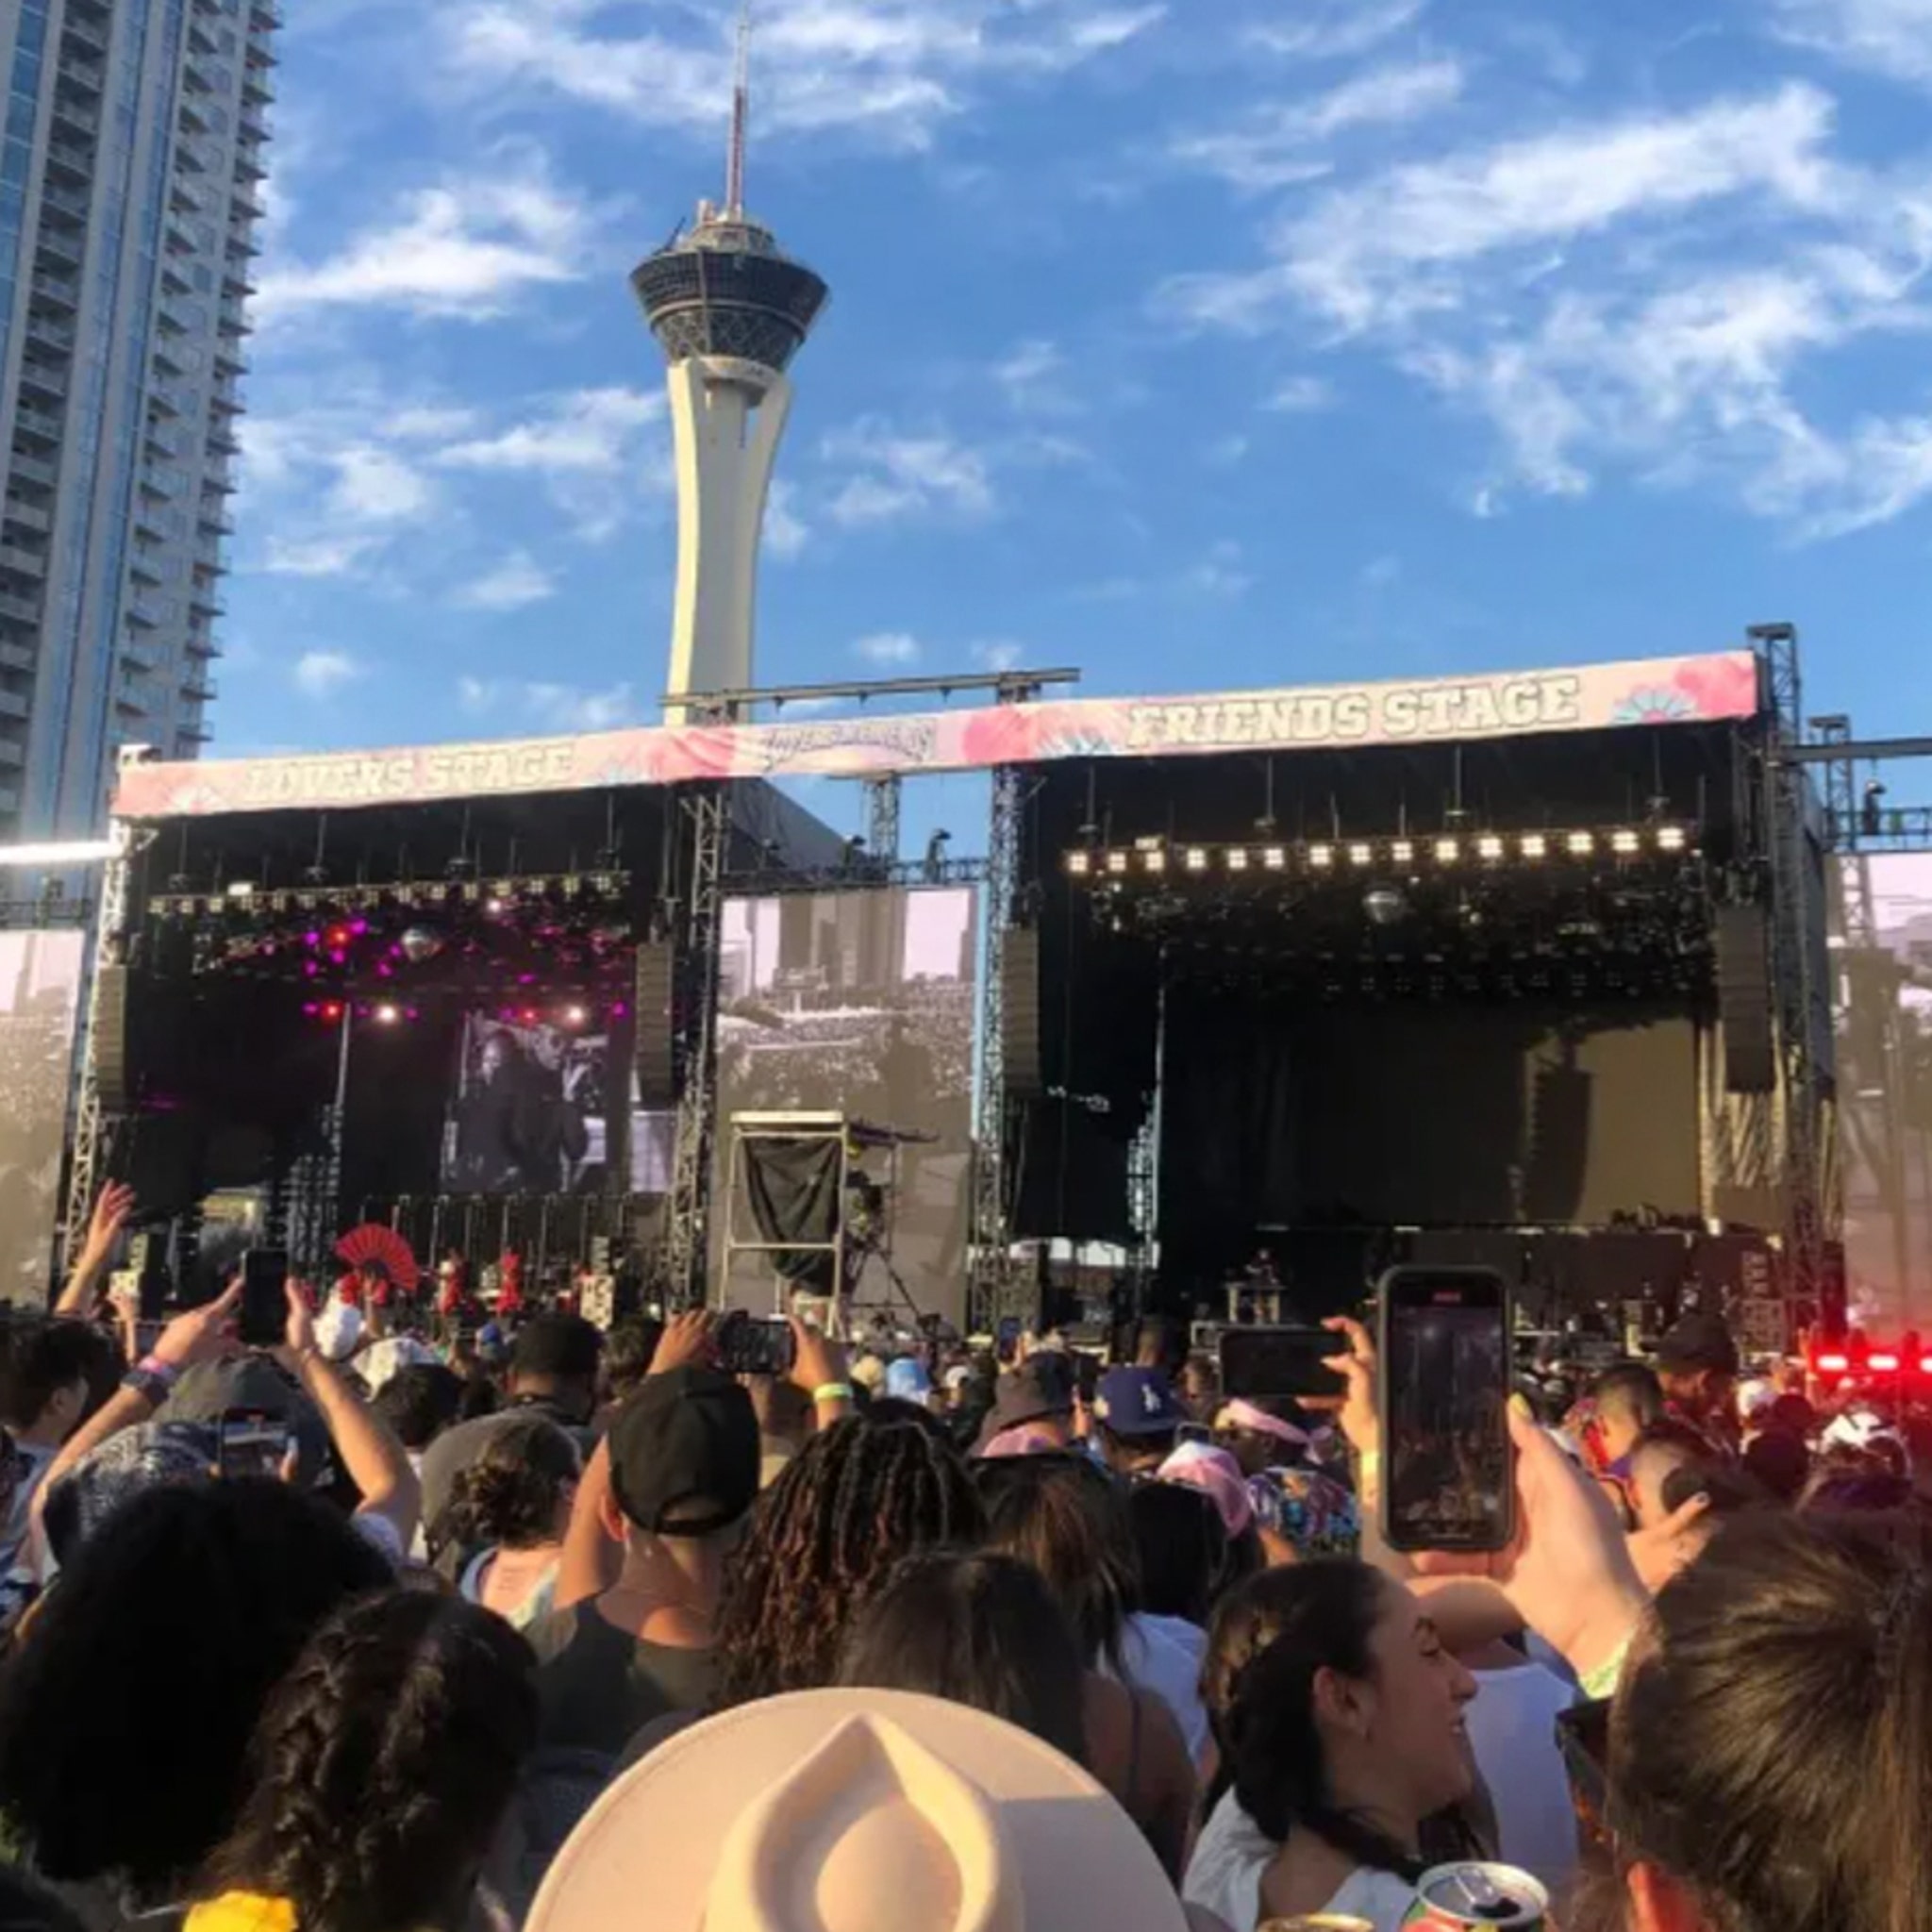 Security Incident' Reported at Las Vegas' Lovers & Friends Festival